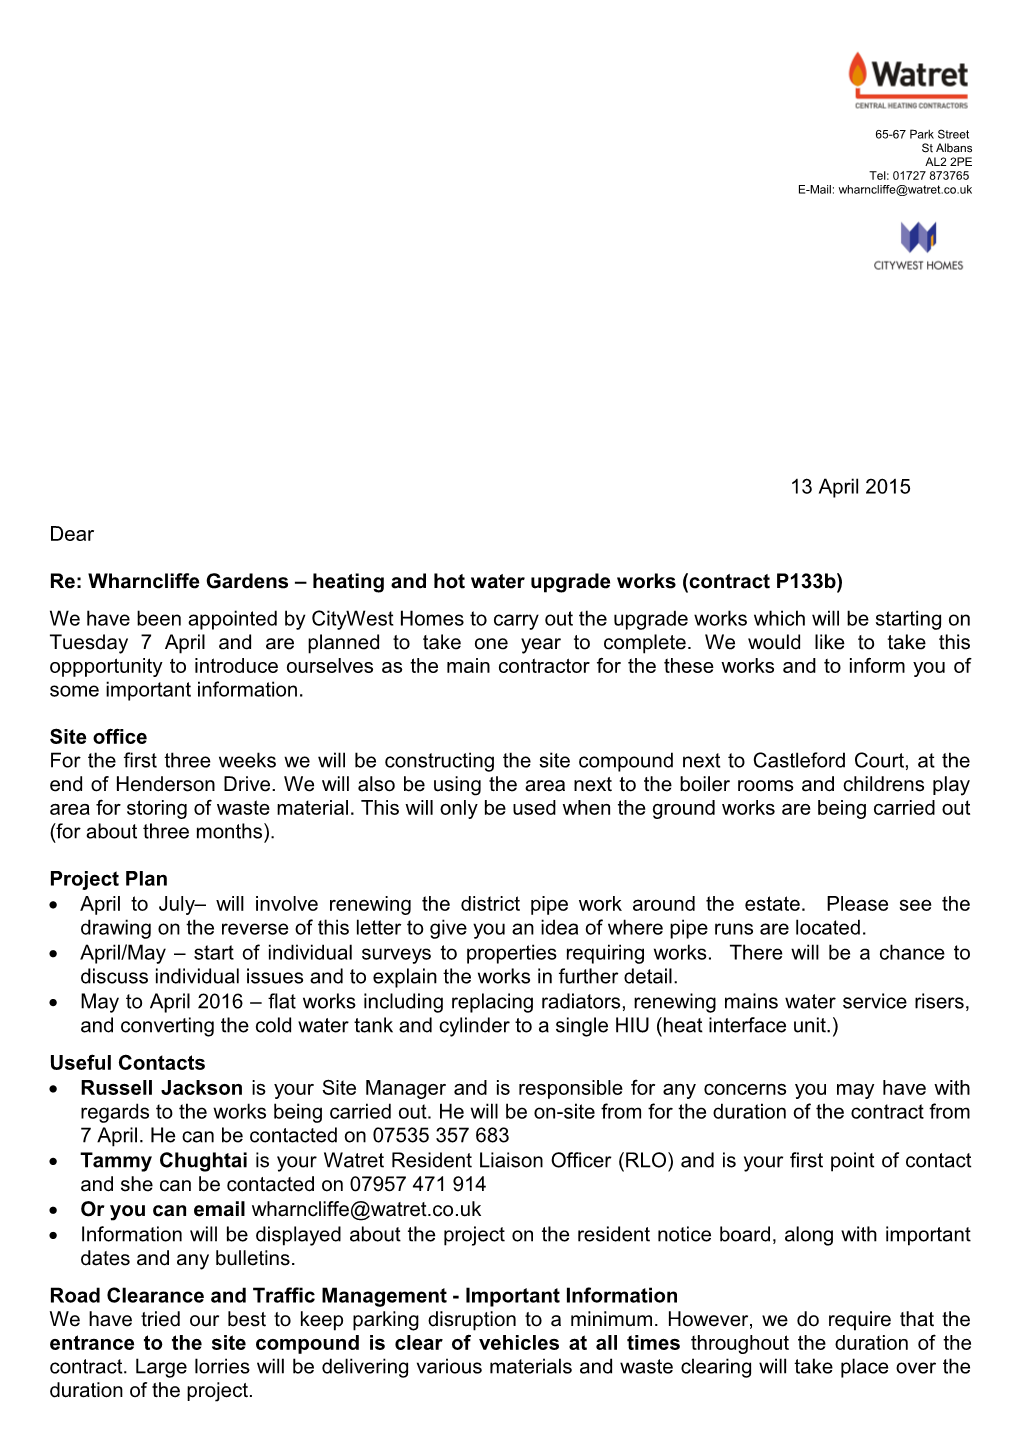 Re: Wharncliffe Gardens Heating and Hot Water Upgrade Works (Contract P133b)